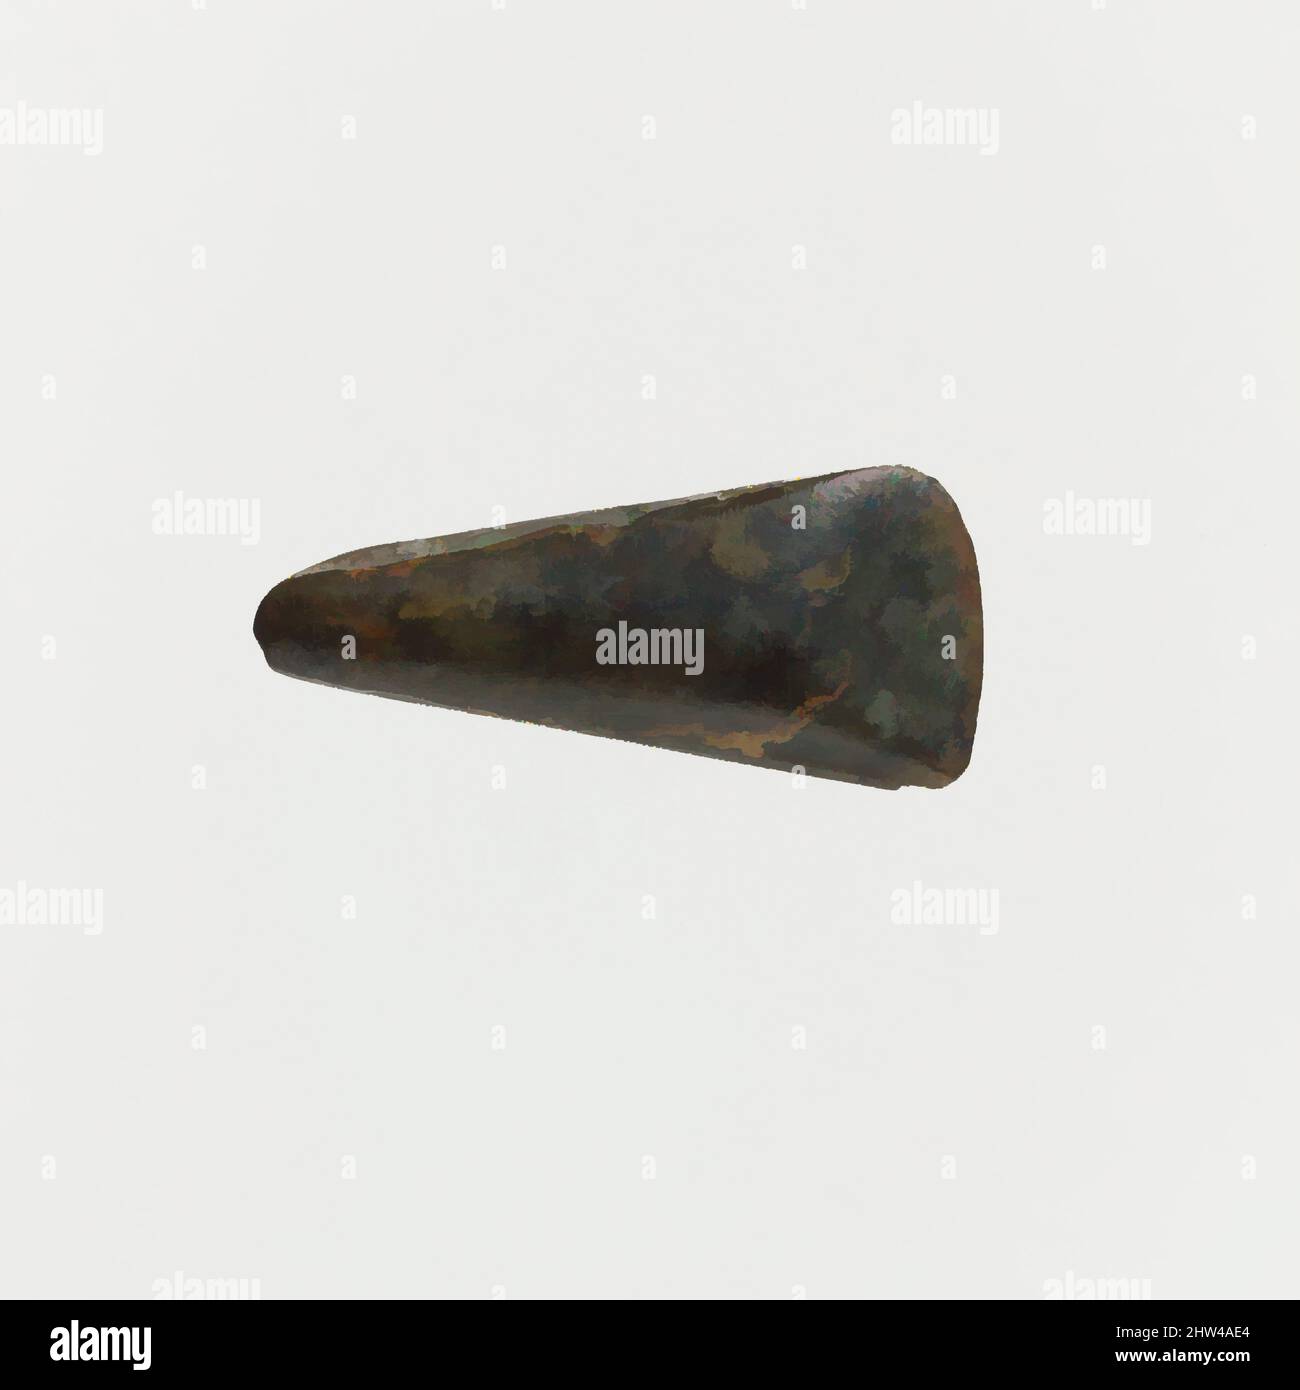 Art inspired by Small hornblende triangular axe, Neolithic, 6th–4th millennium B.C., Cretan, Stone, Length 1 1/4 in. (3.2 cm); H. 1/2 in. (1.2 cm), Miscellaneous-Stone, Celt, Classic works modernized by Artotop with a splash of modernity. Shapes, color and value, eye-catching visual impact on art. Emotions through freedom of artworks in a contemporary way. A timeless message pursuing a wildly creative new direction. Artists turning to the digital medium and creating the Artotop NFT Stock Photo